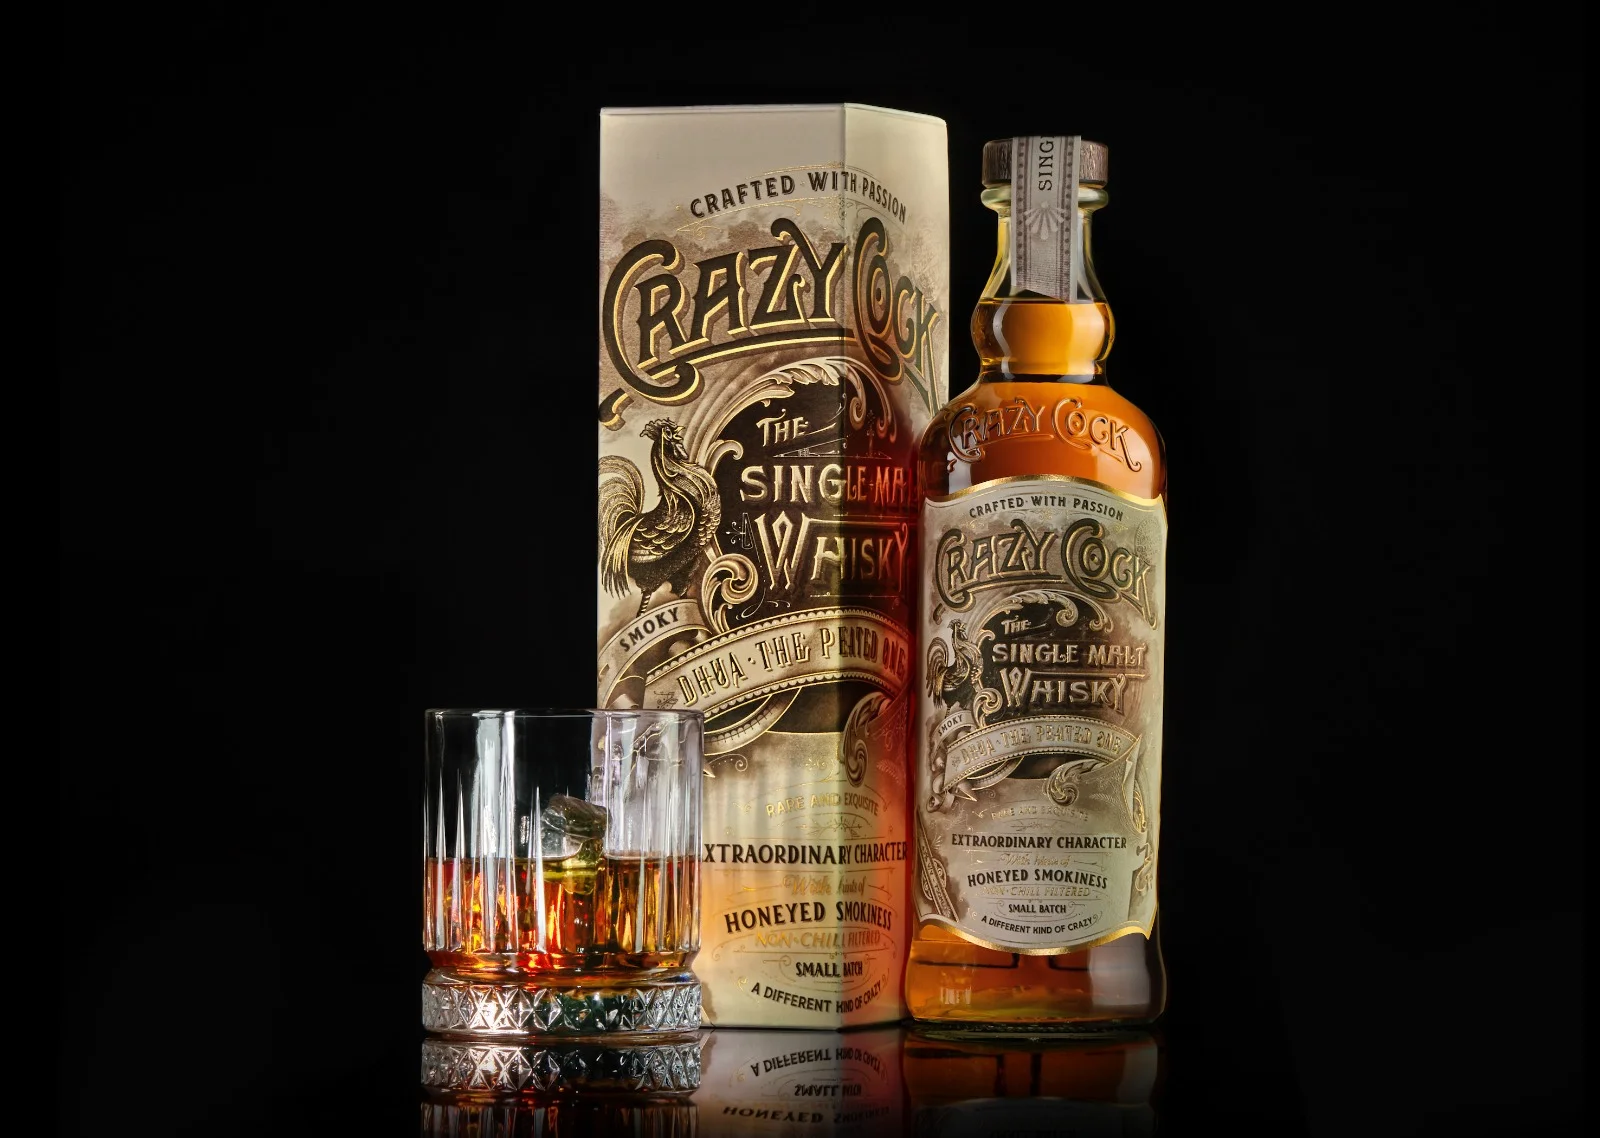 South Seas Distilleries' “CRAZY COCK “ The single malt whisky expands its footprint in Goa after it's successful launch in Mumbai - HospiBuz